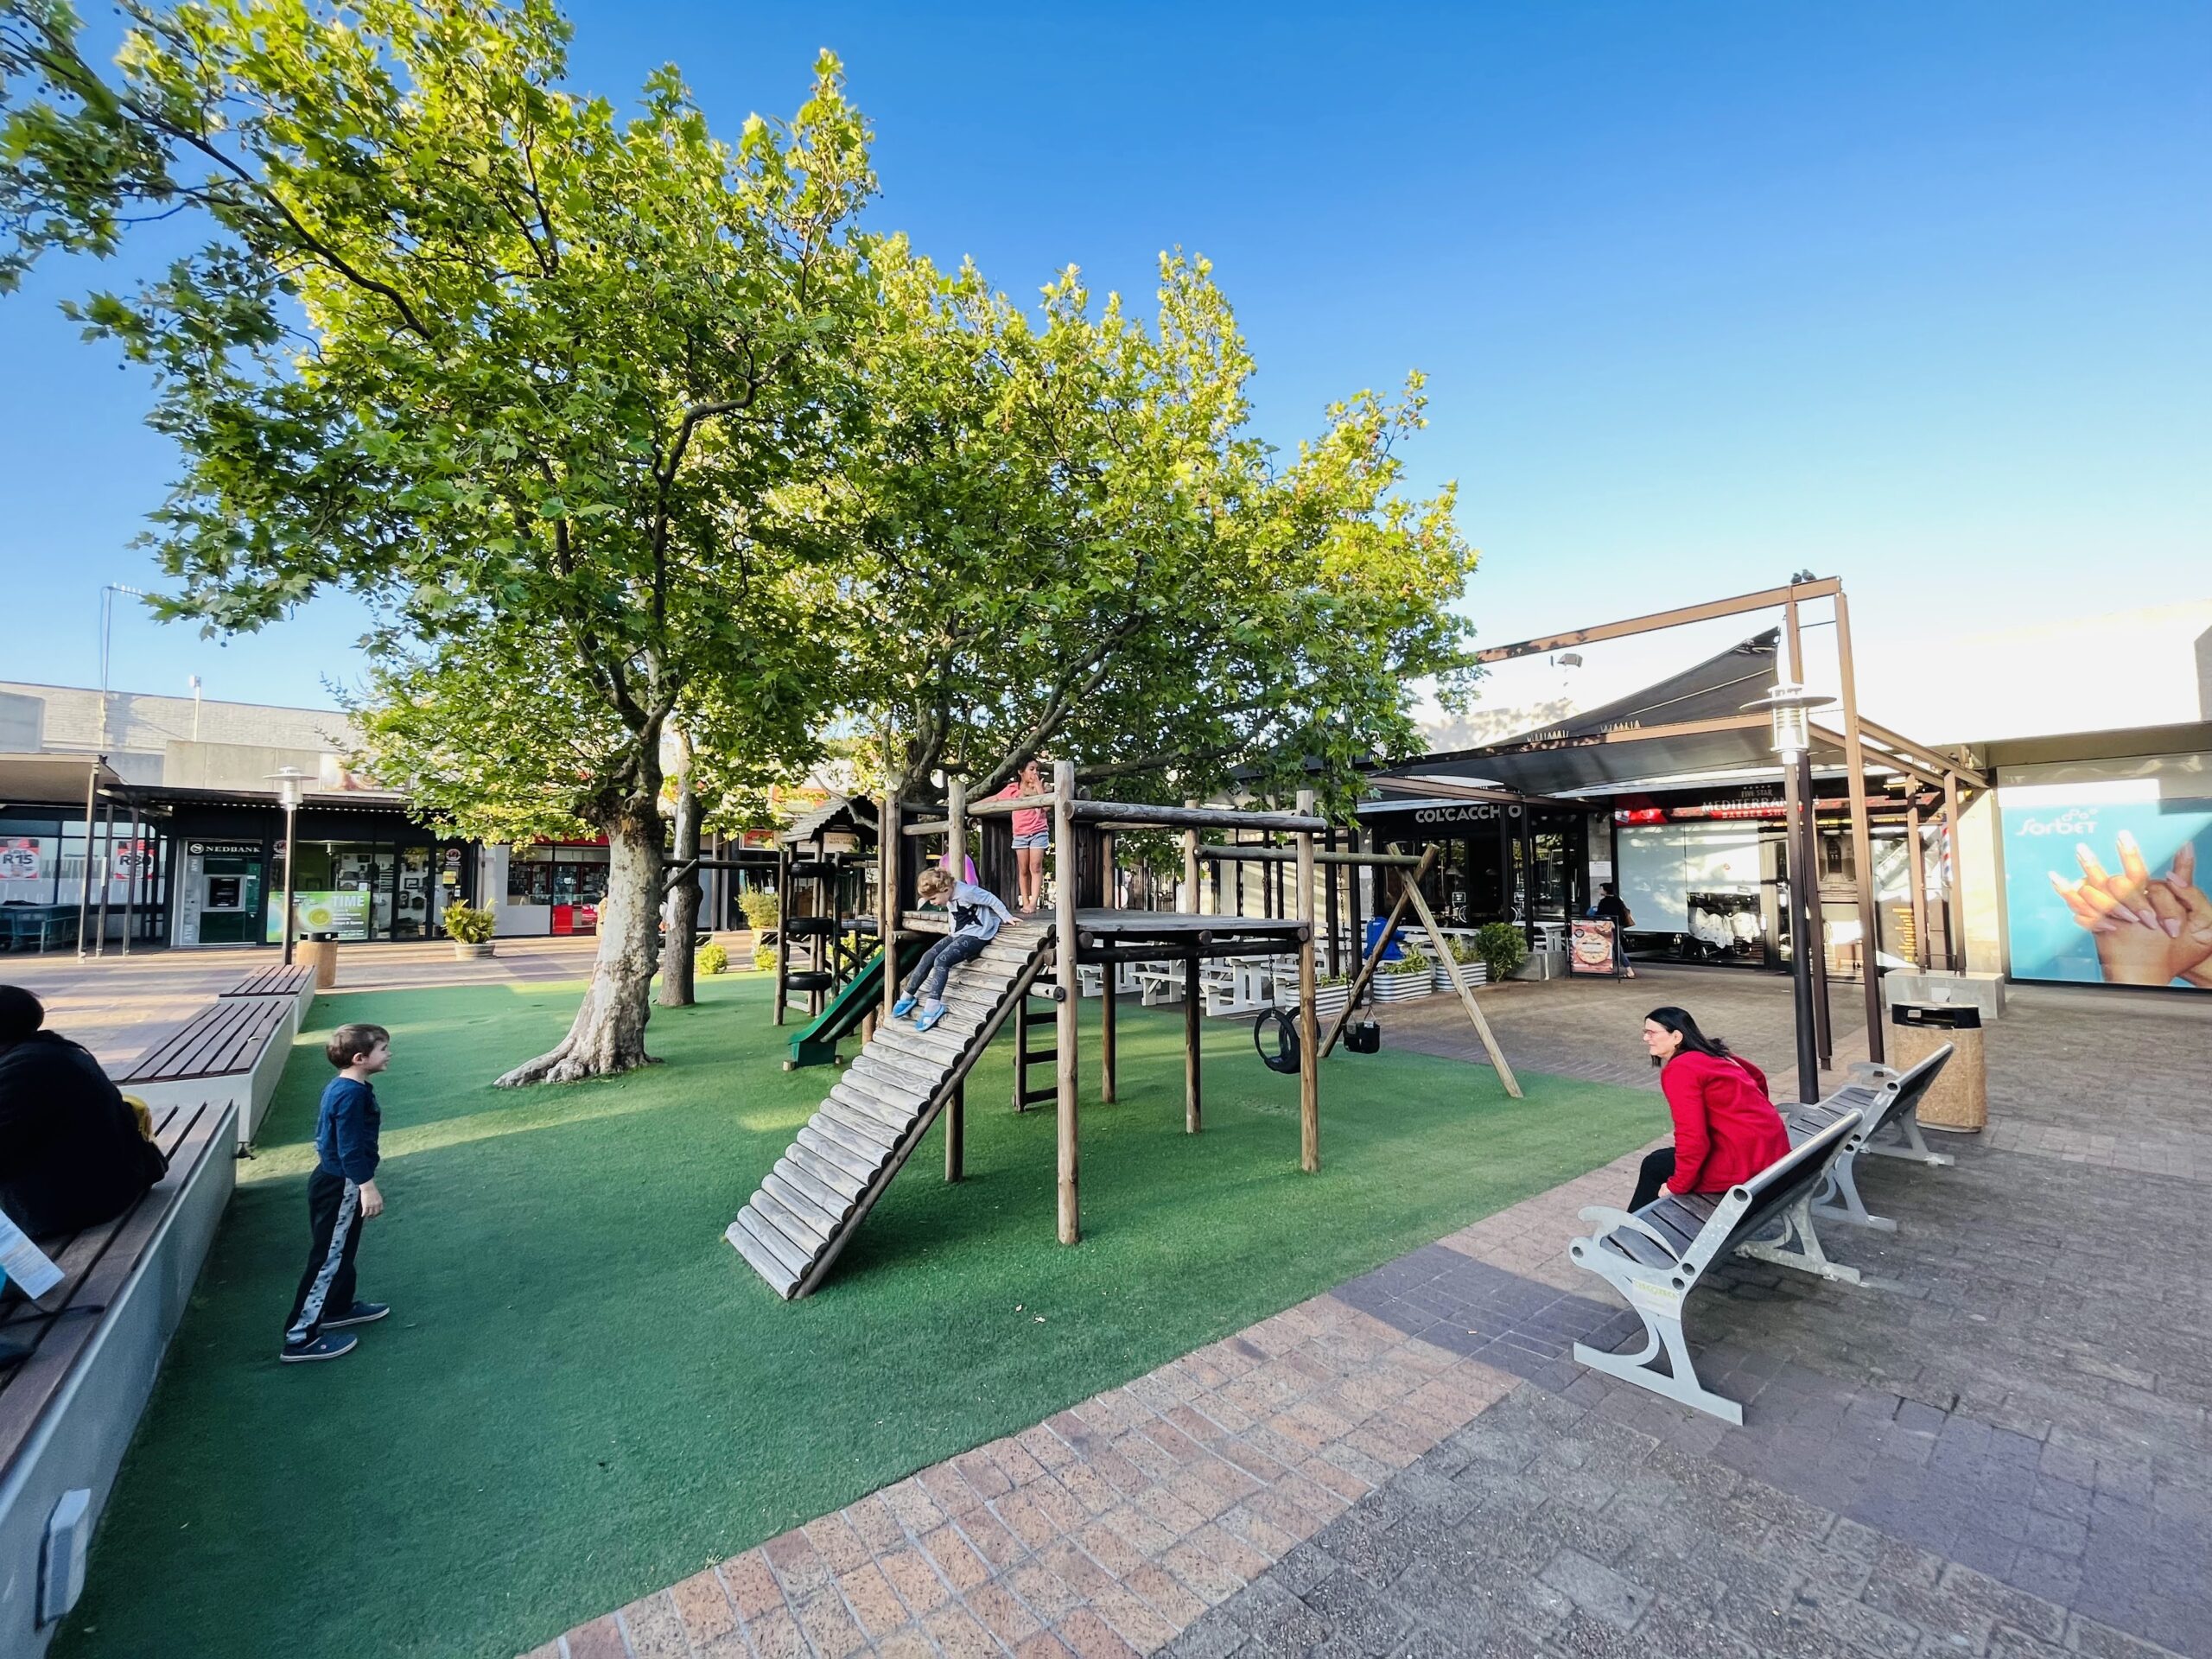 Col'Cacchio Meadowridge Play Area Overview